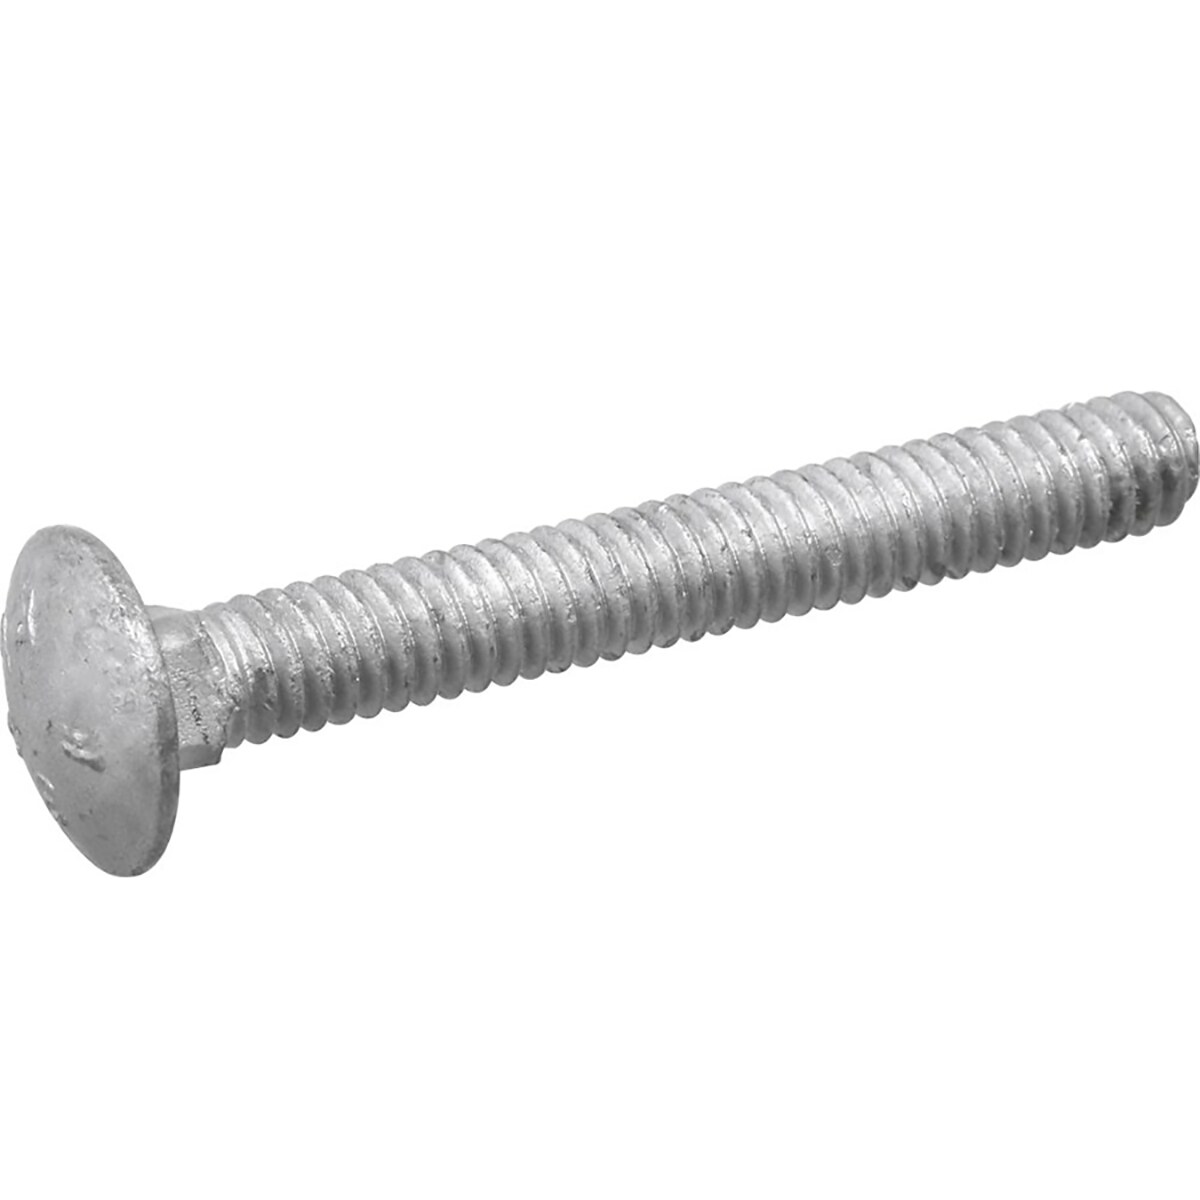 Stainless Steel Carriage Bolt 25-3/8-16 x 2-1/2 